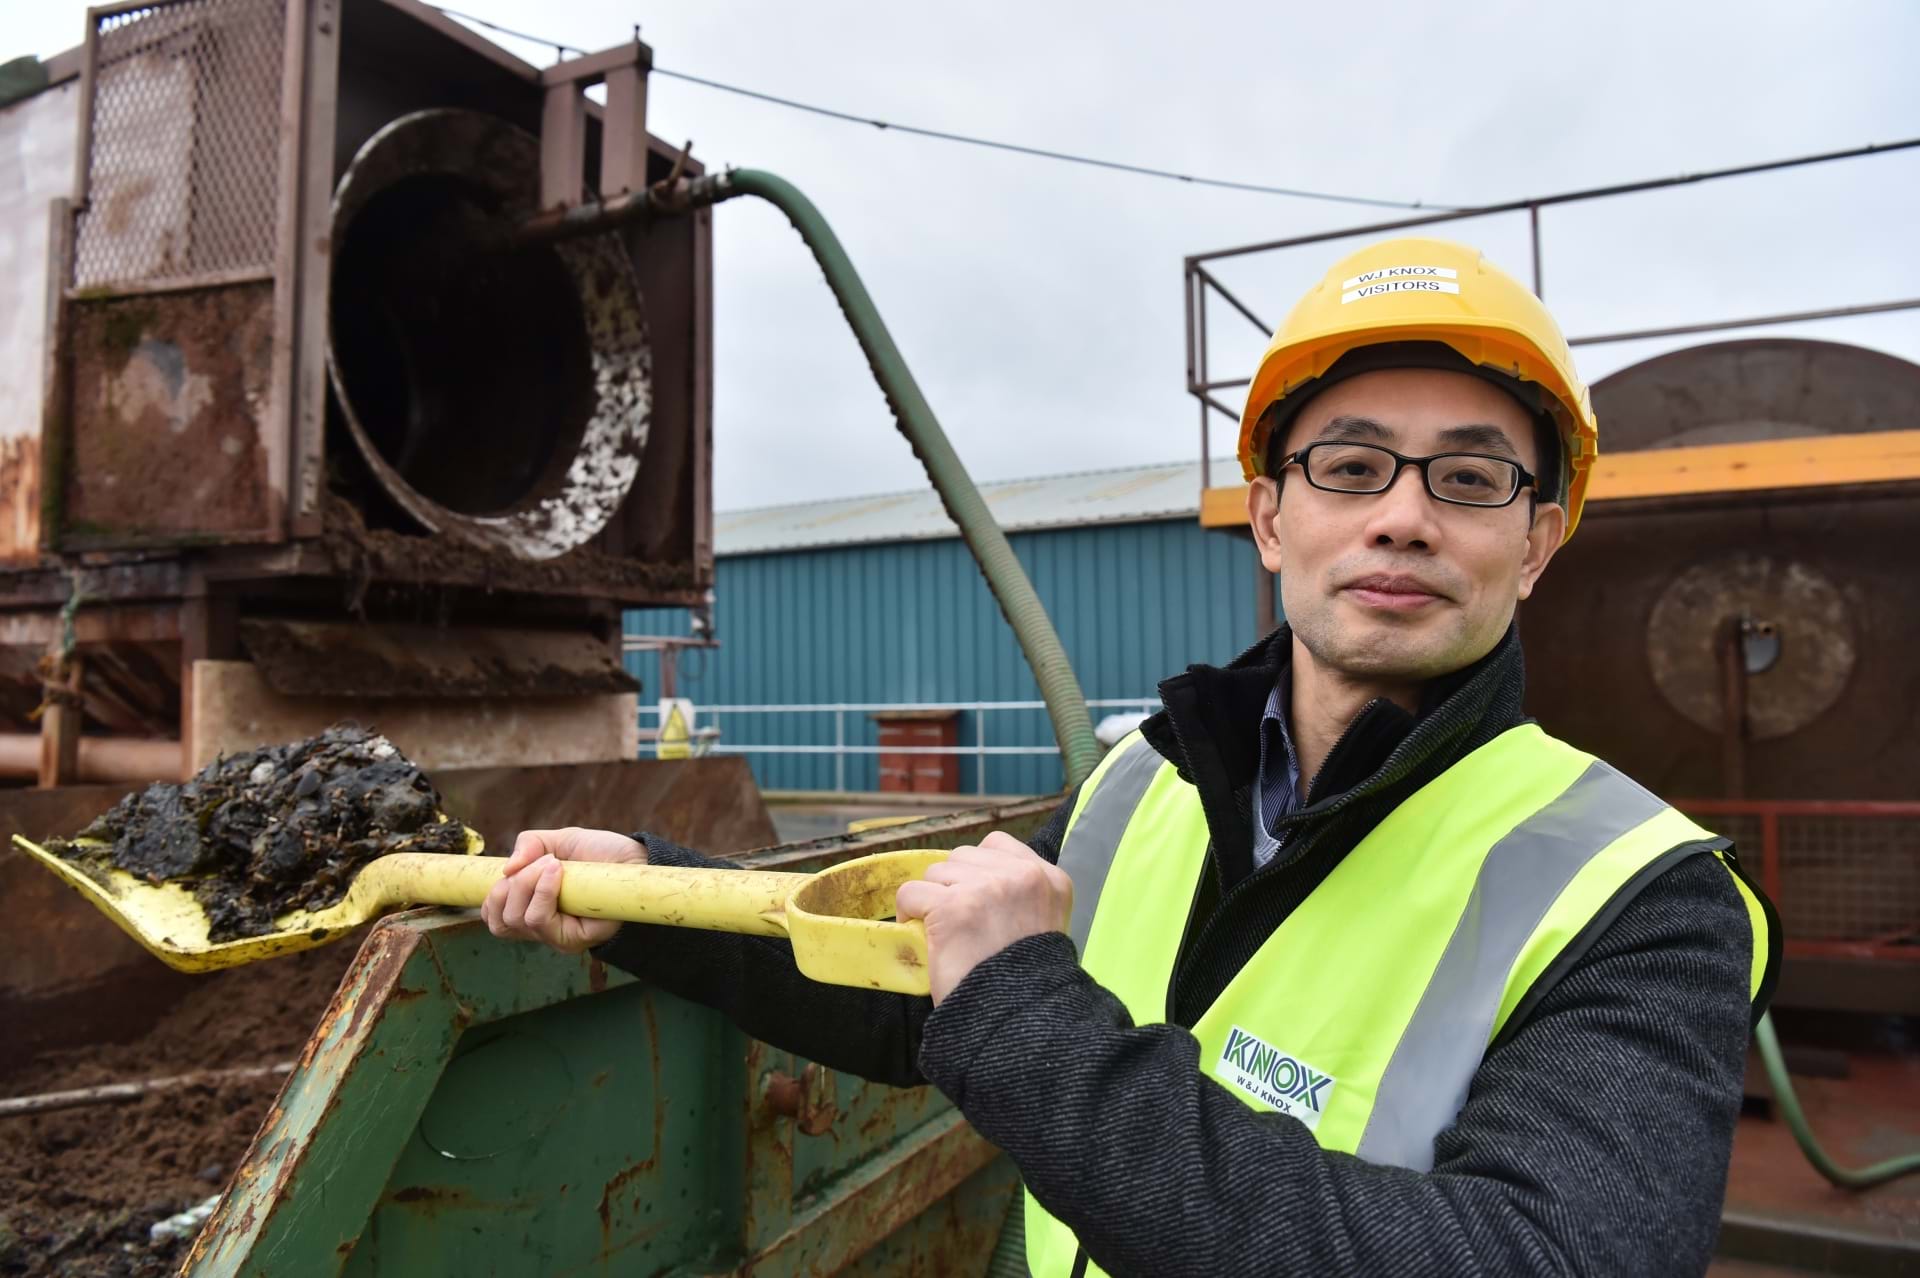 Boon Seang Chung of Abertay University's School of Applied Sciences shovelling waste into a skip